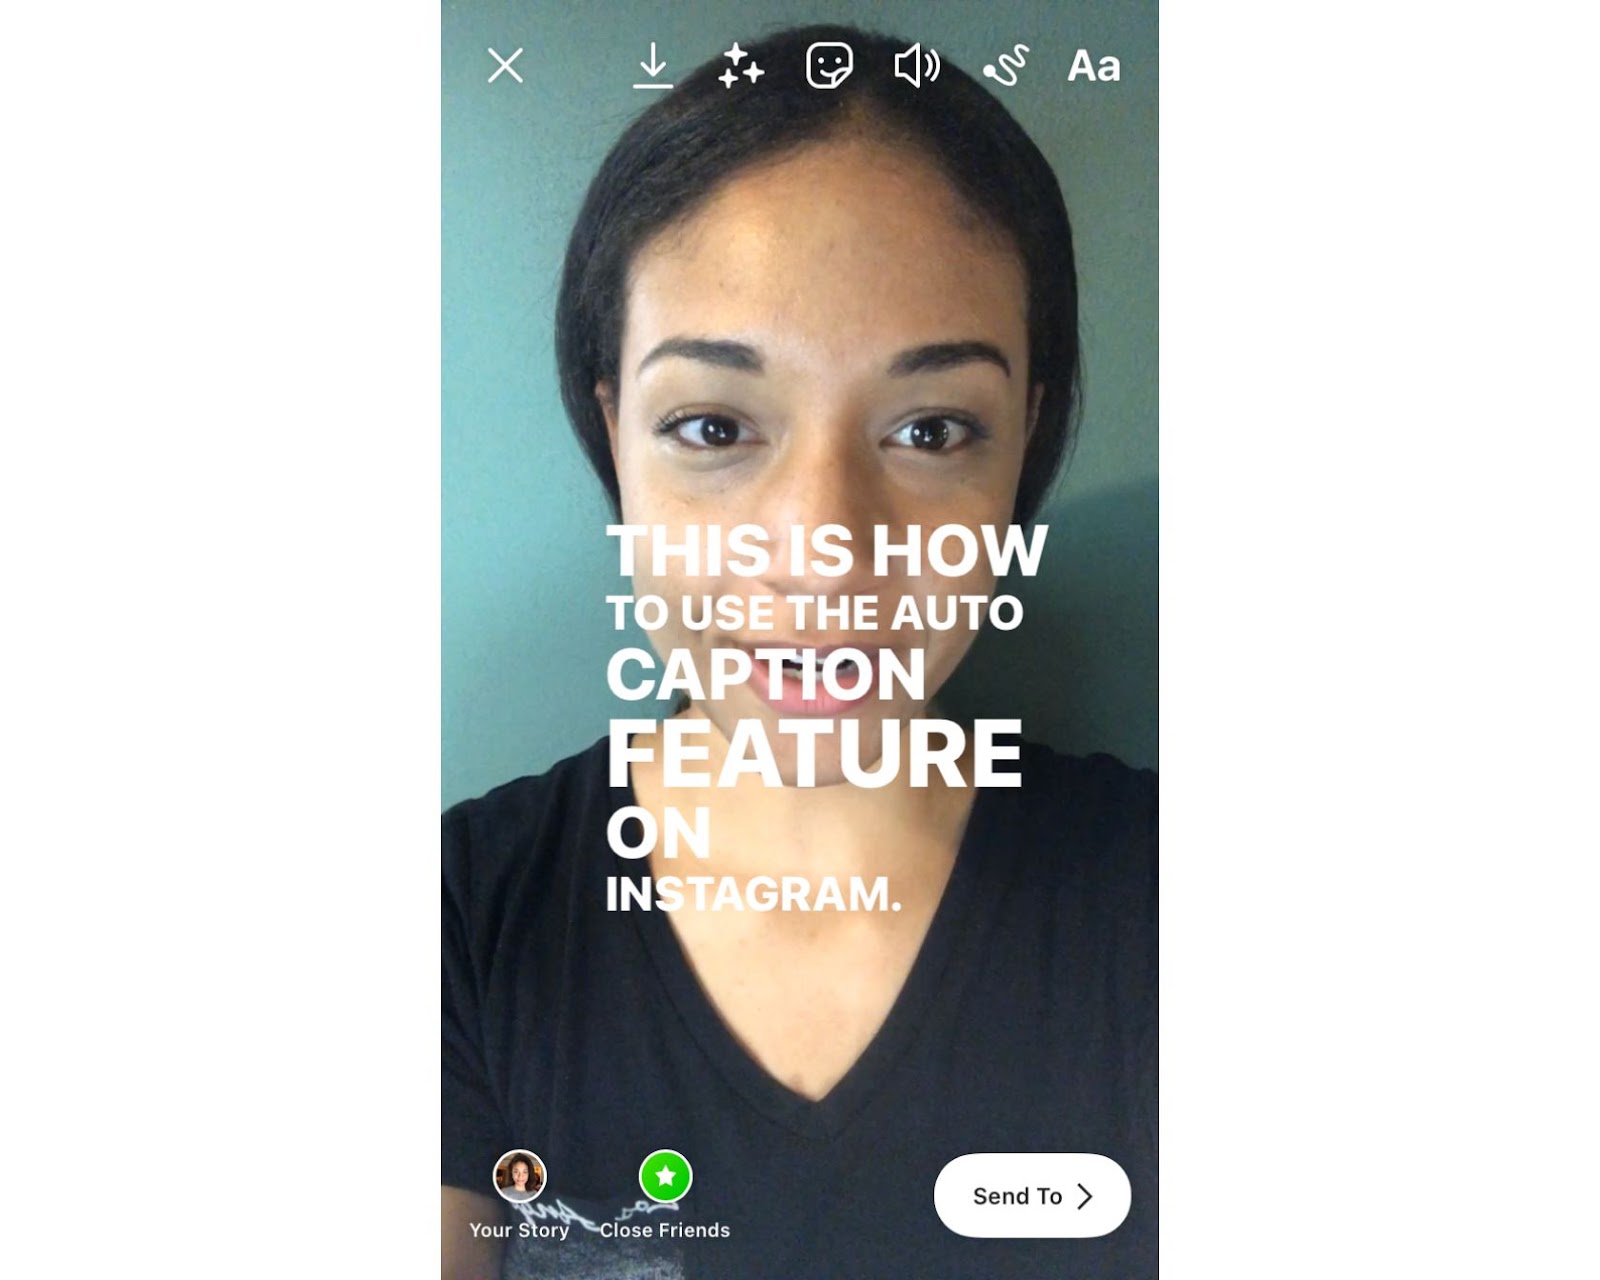 a screenshot showing captions on an Instagram Story